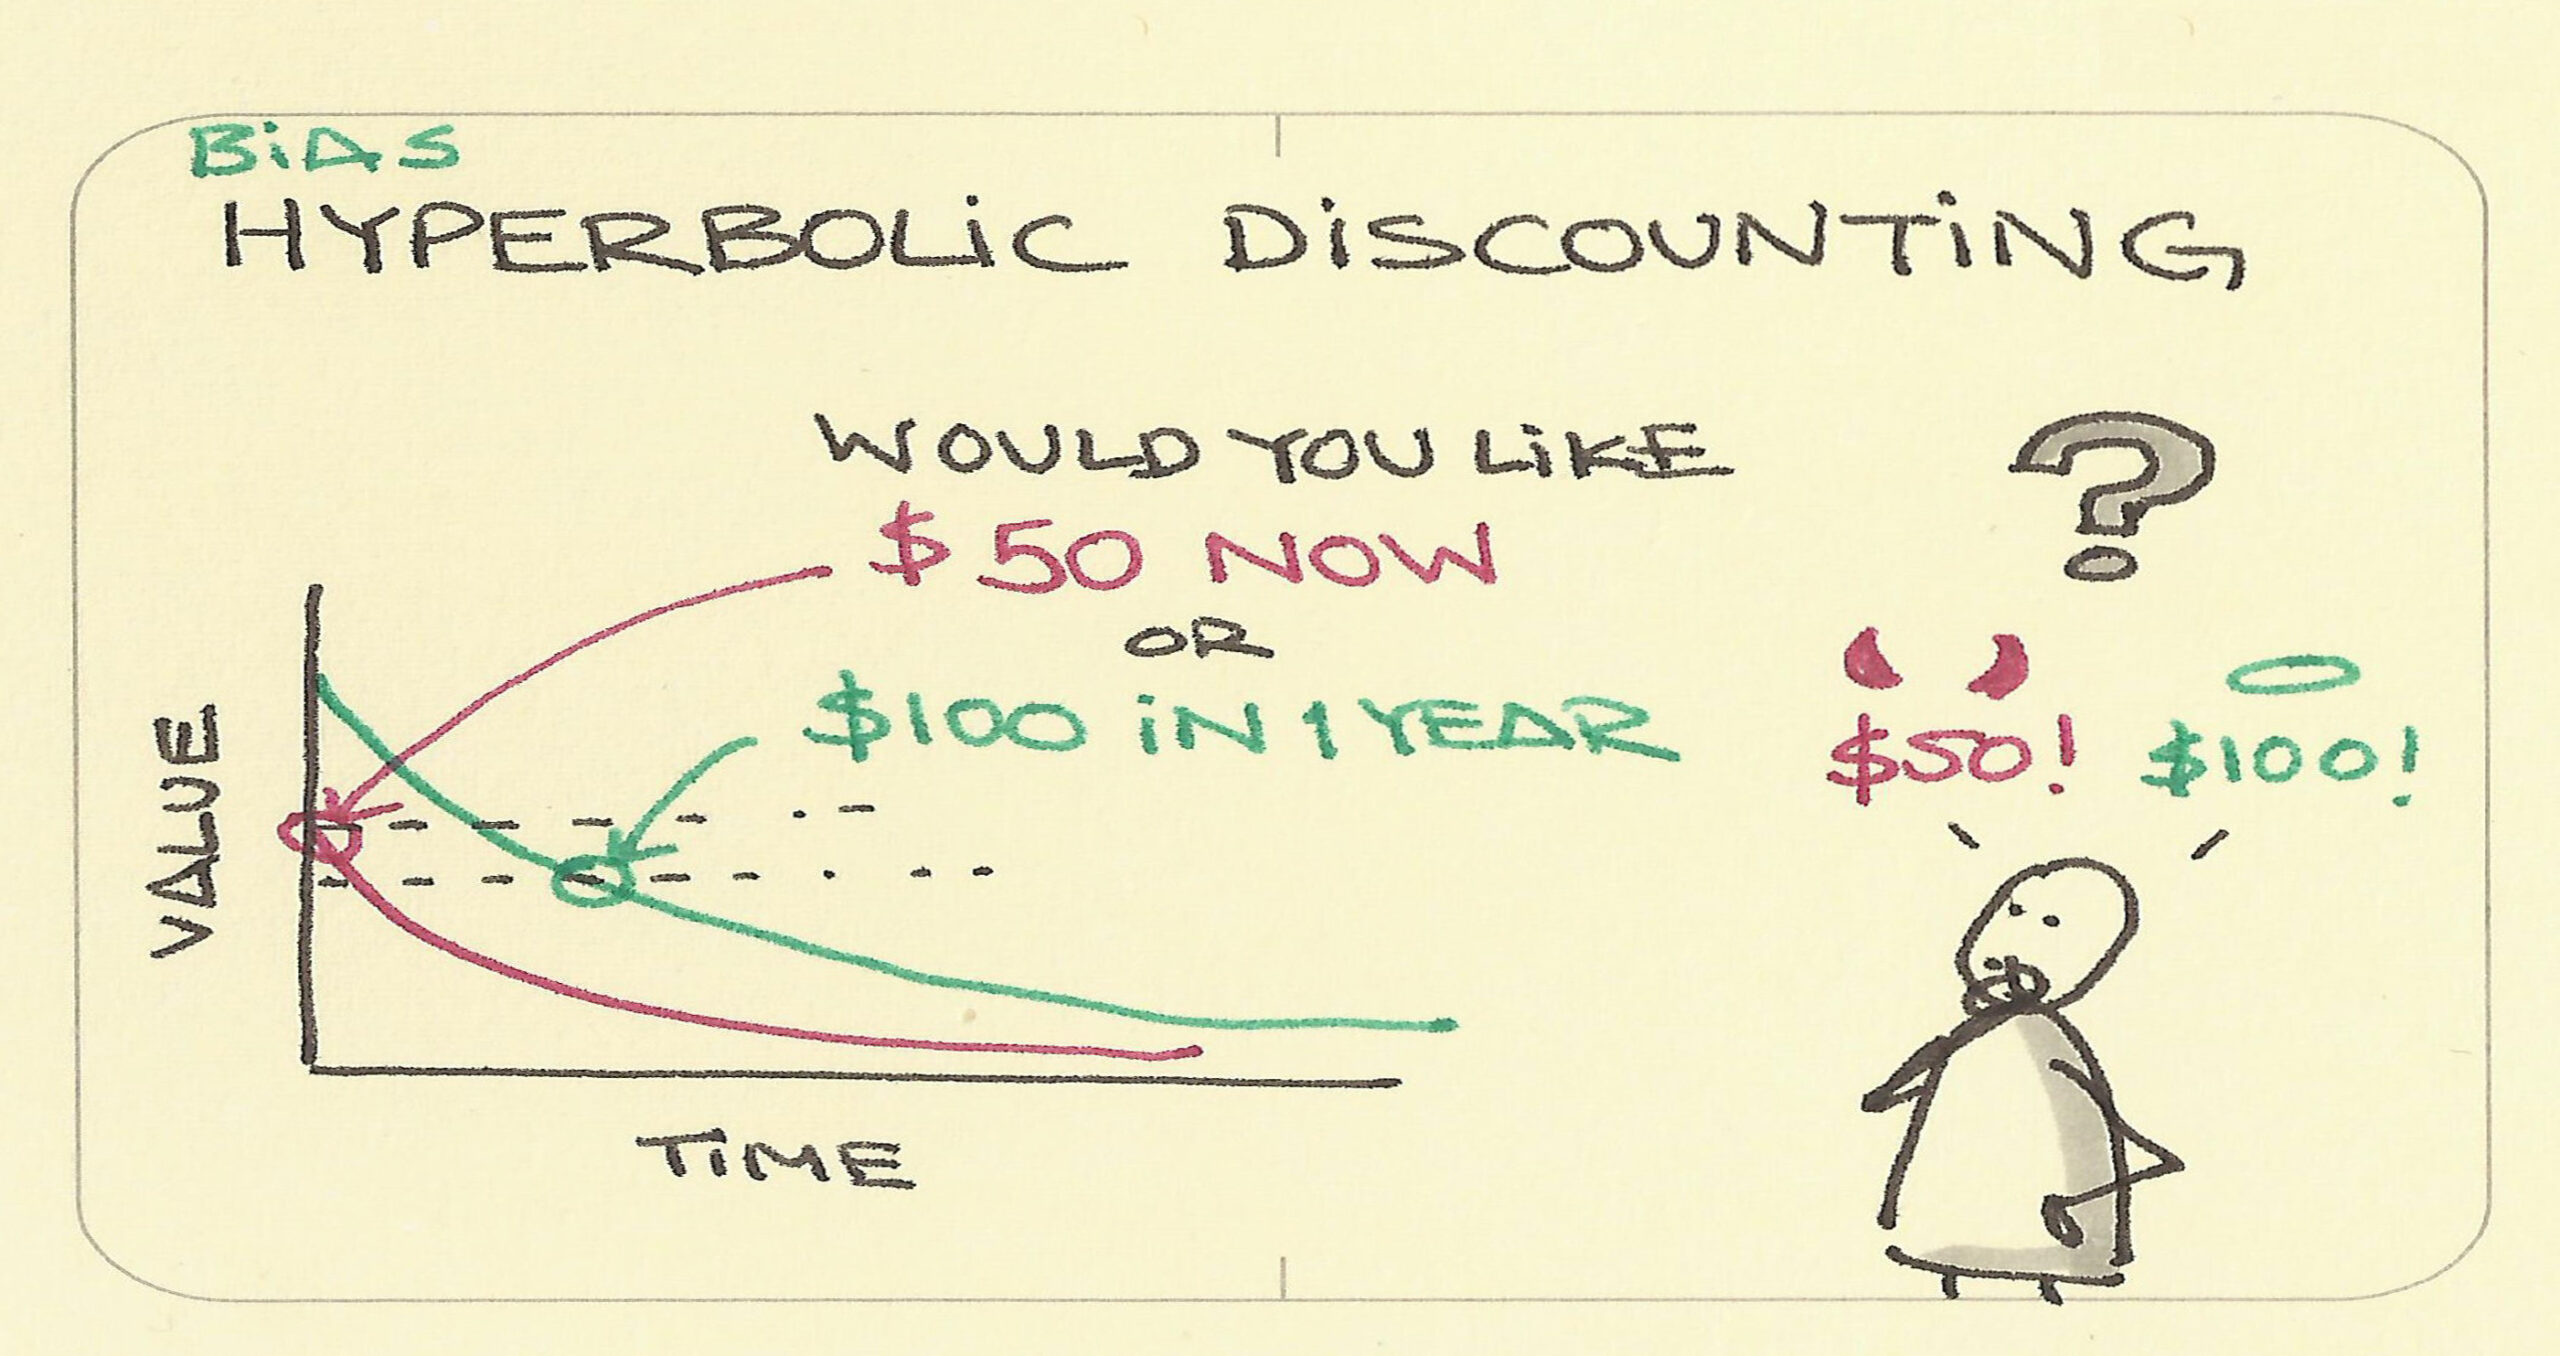 Hyperbolic Discounting illustrations